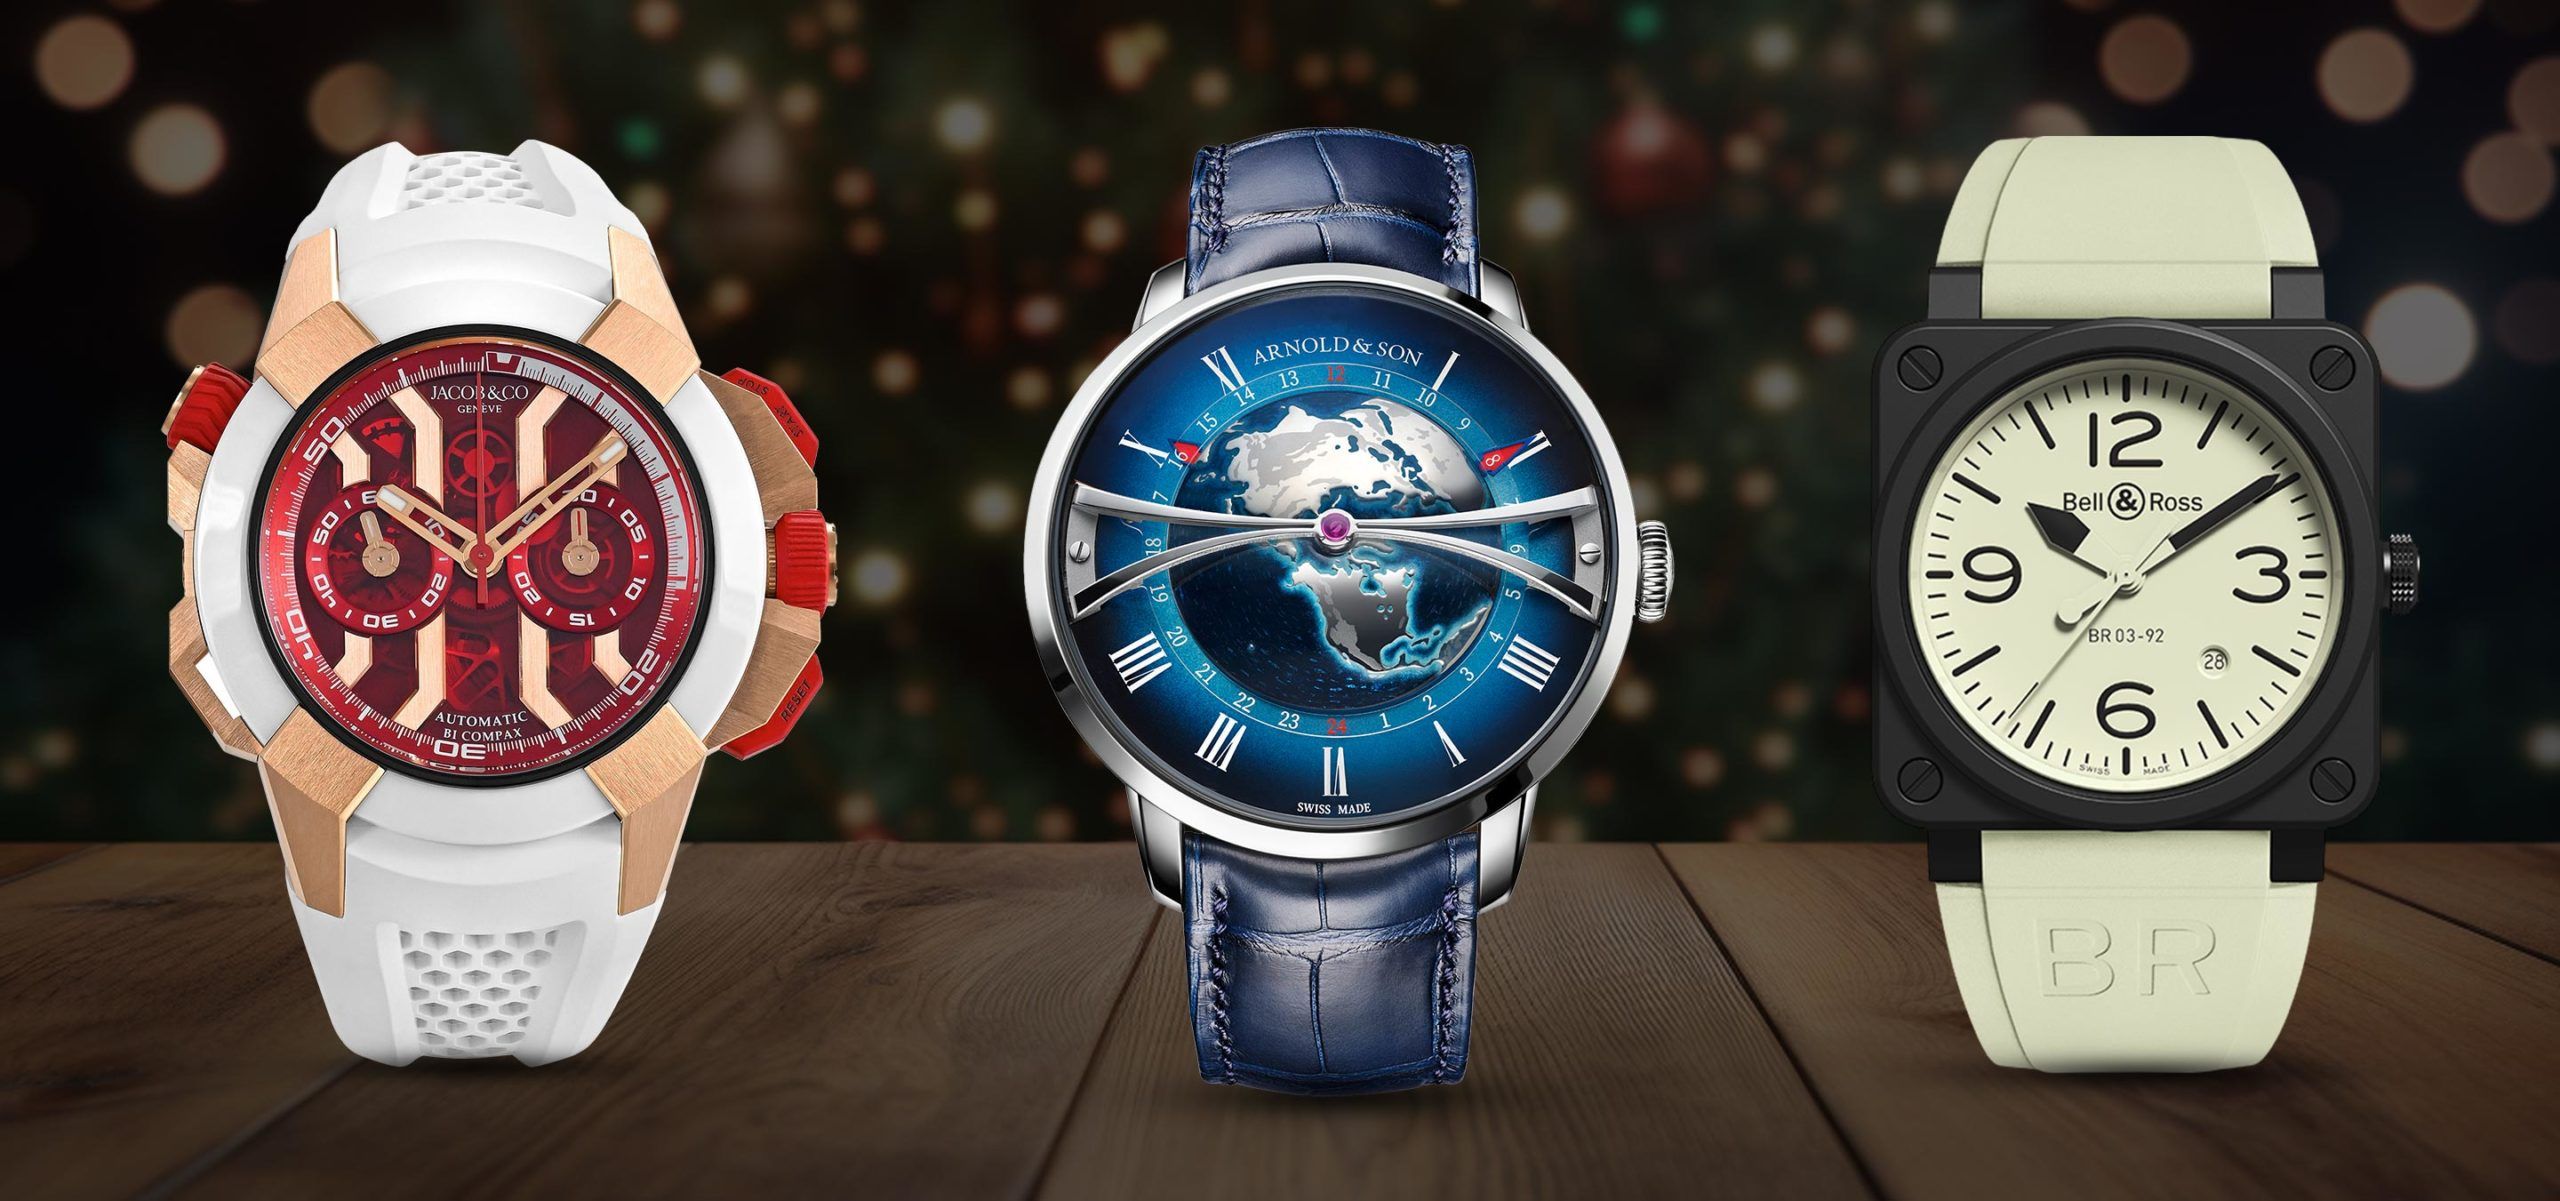 You Better Watch Out… Santa Claus Is Coming To Town!